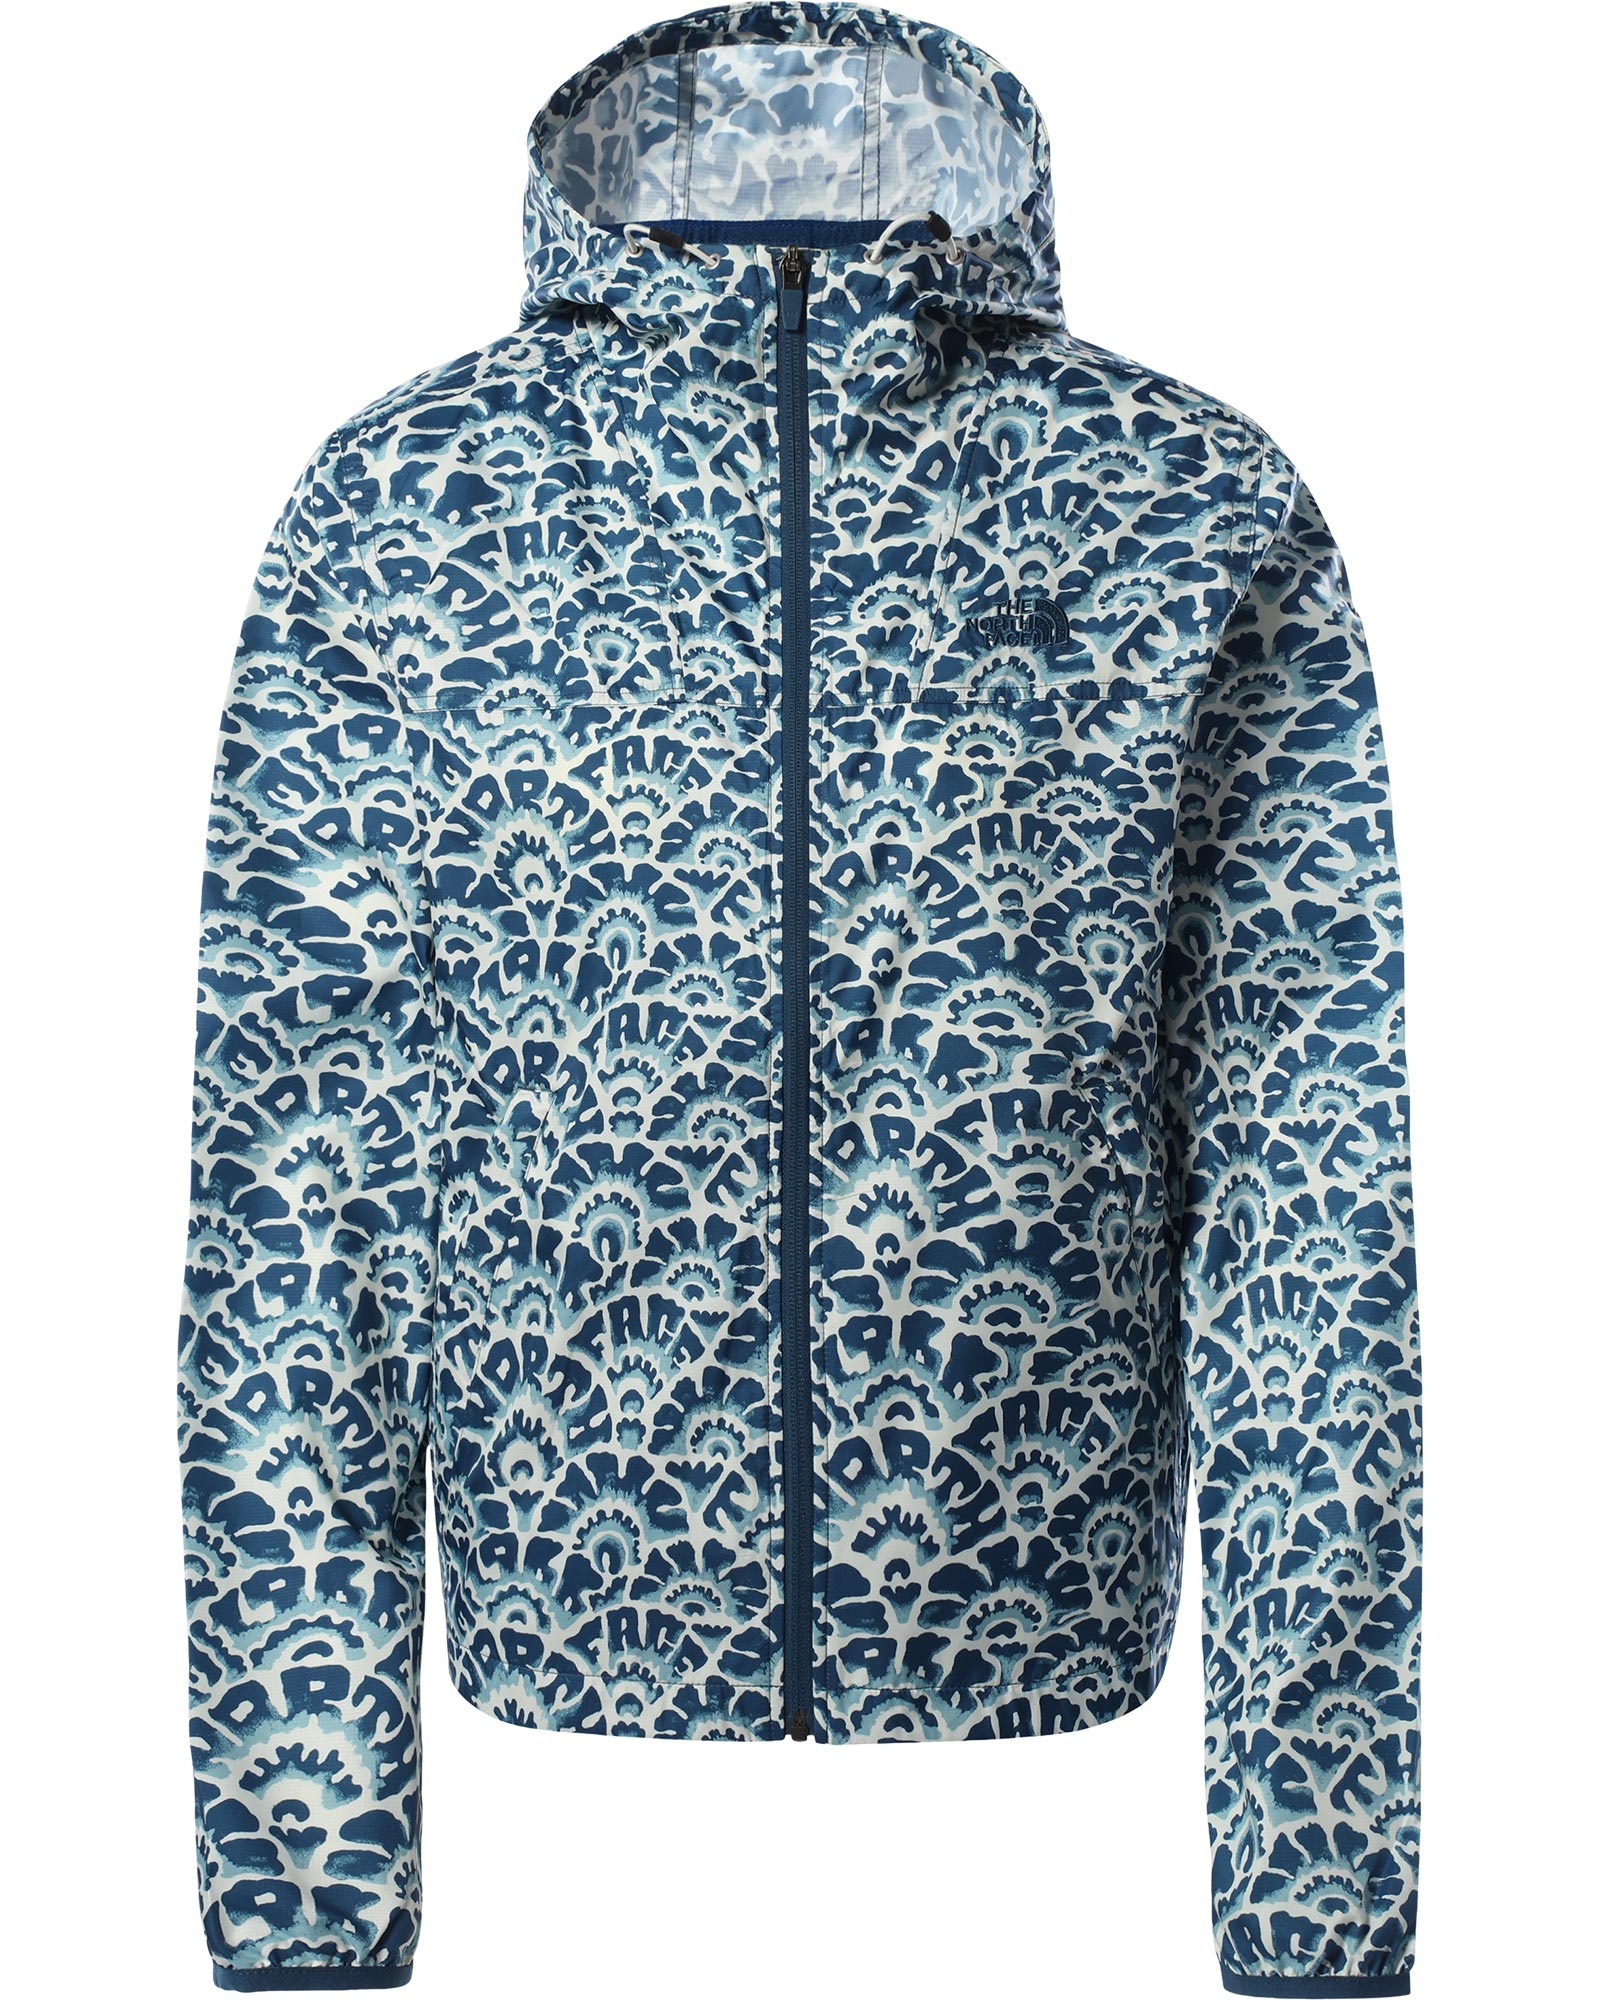 The North Face Cyclone Women’s Jacket - Monterey Blue Print S